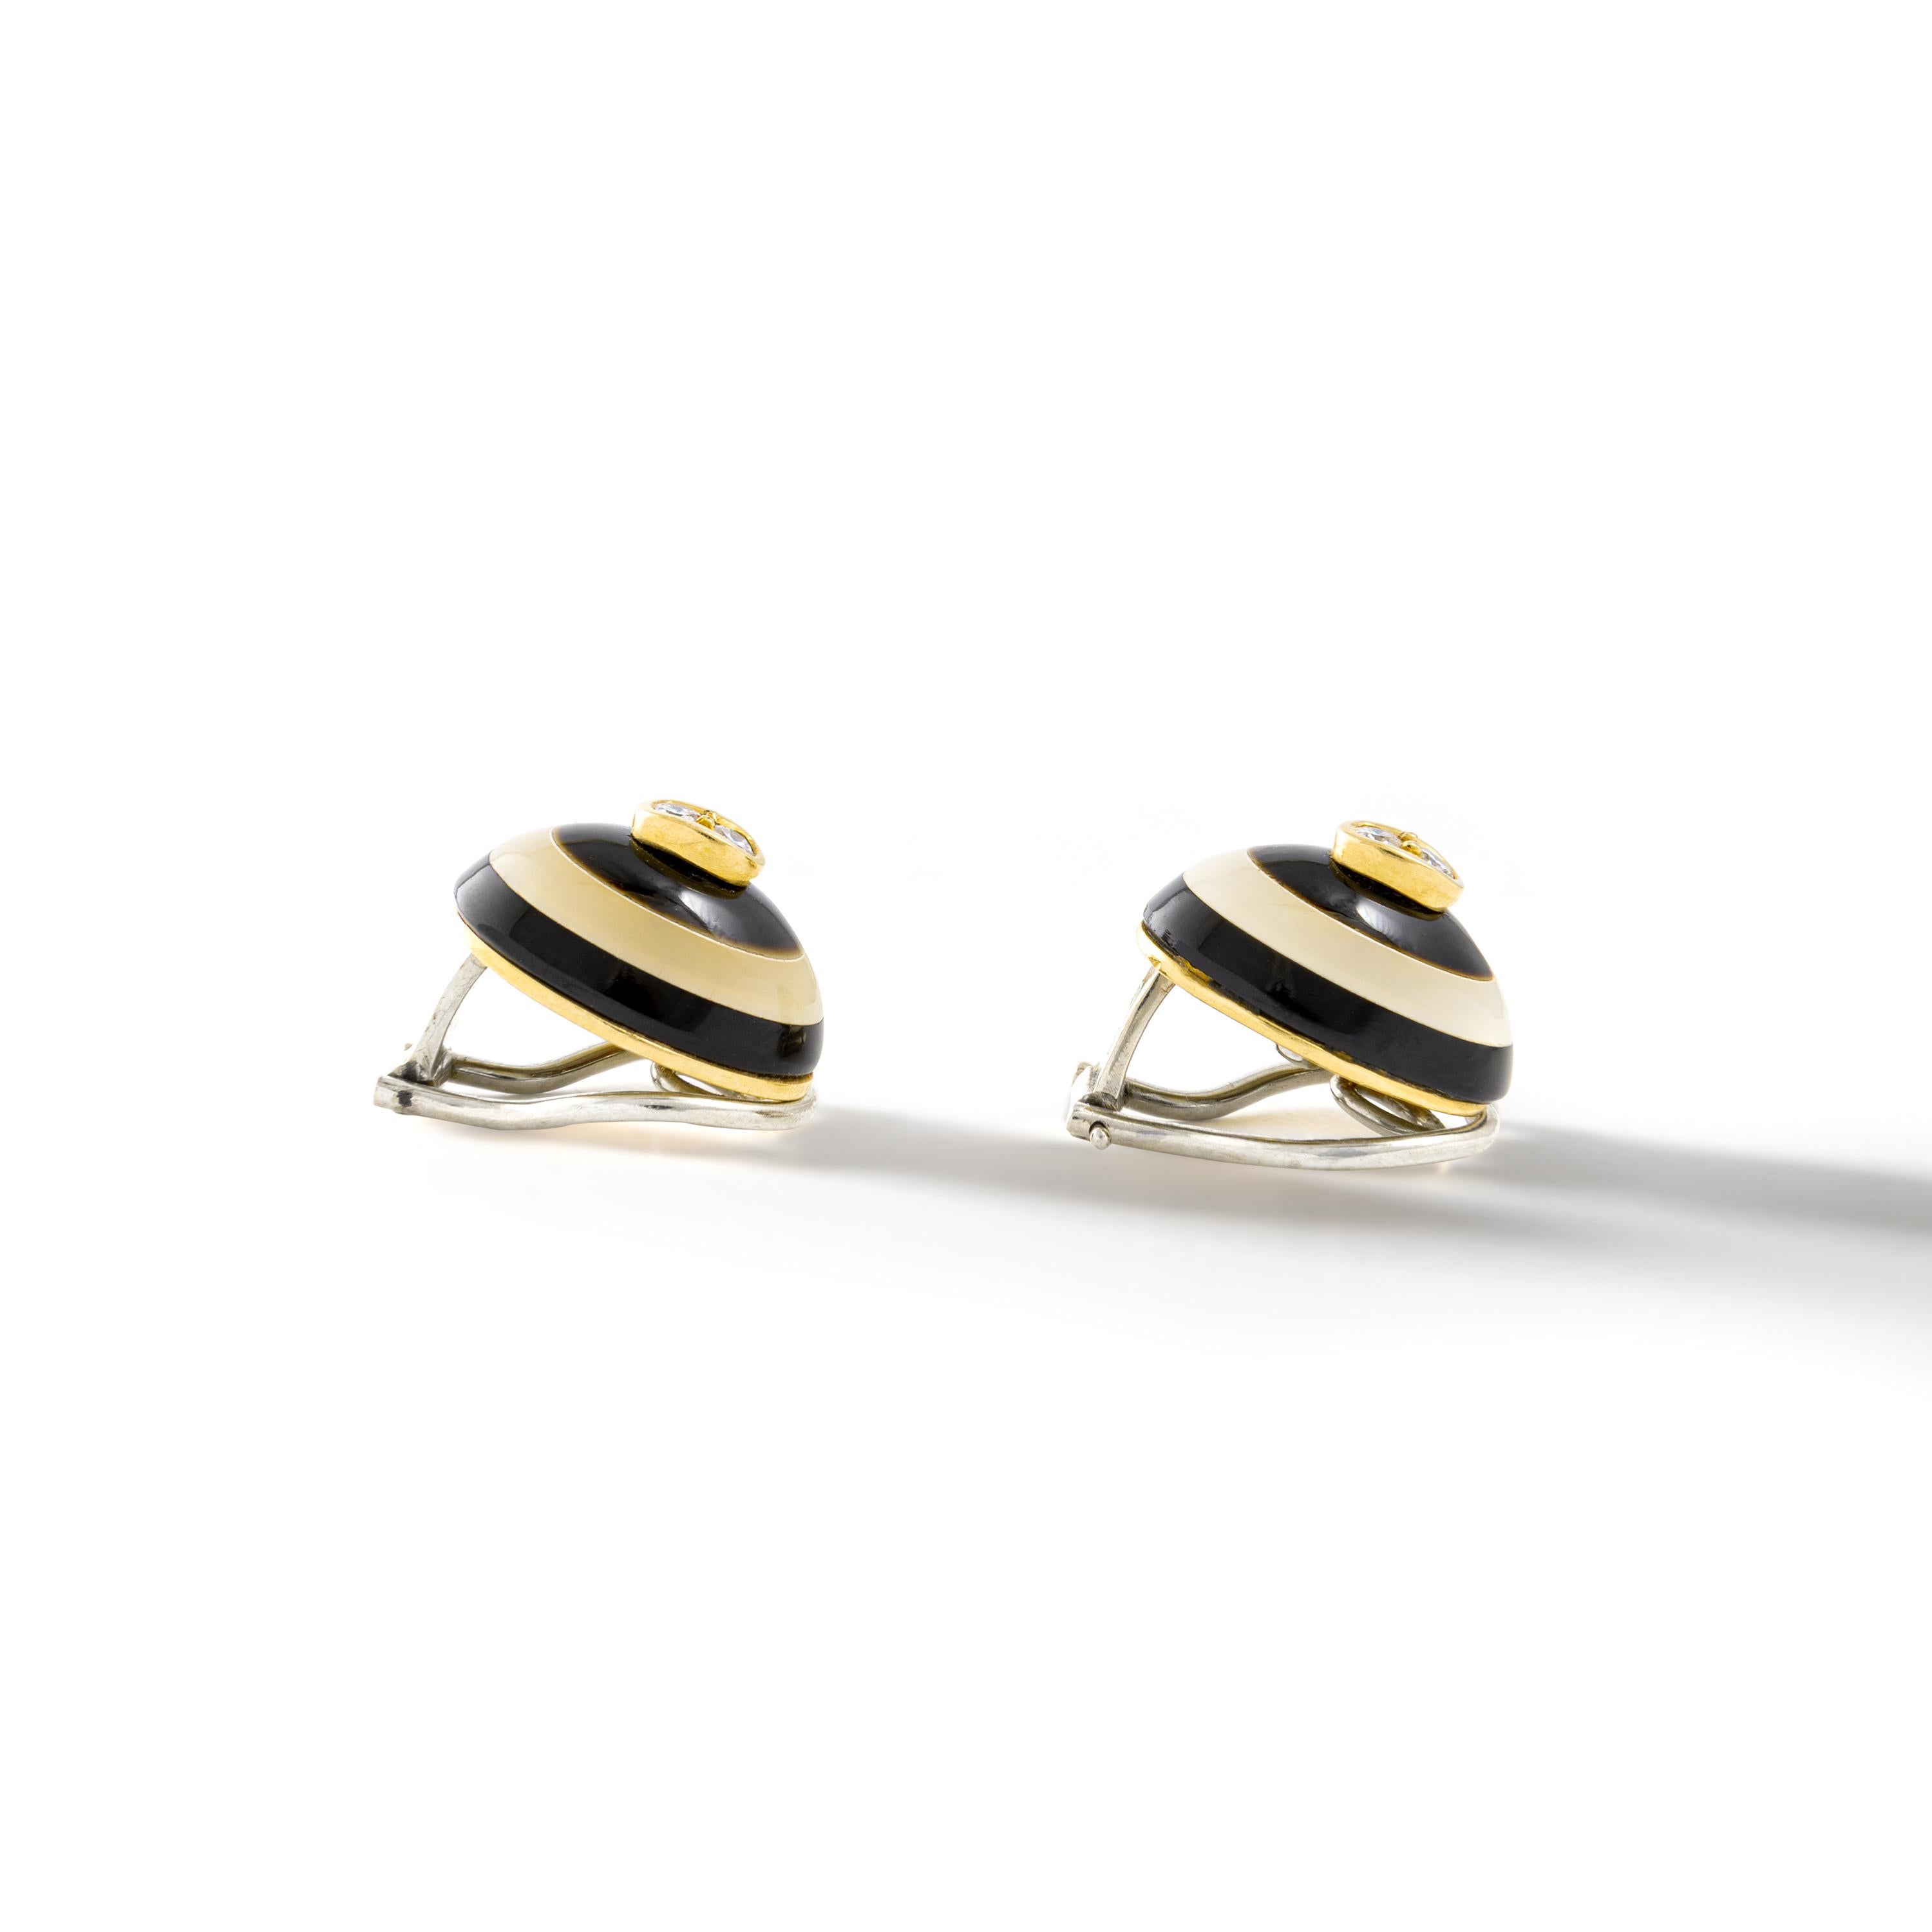 Diamond Black and White Stone on Yellow Gold 18k Earclips.
Circa 1980.

Total height: 0.59 inch (1.50 centimeters).
Total width: 0.43 inch (1.10 centimeters).